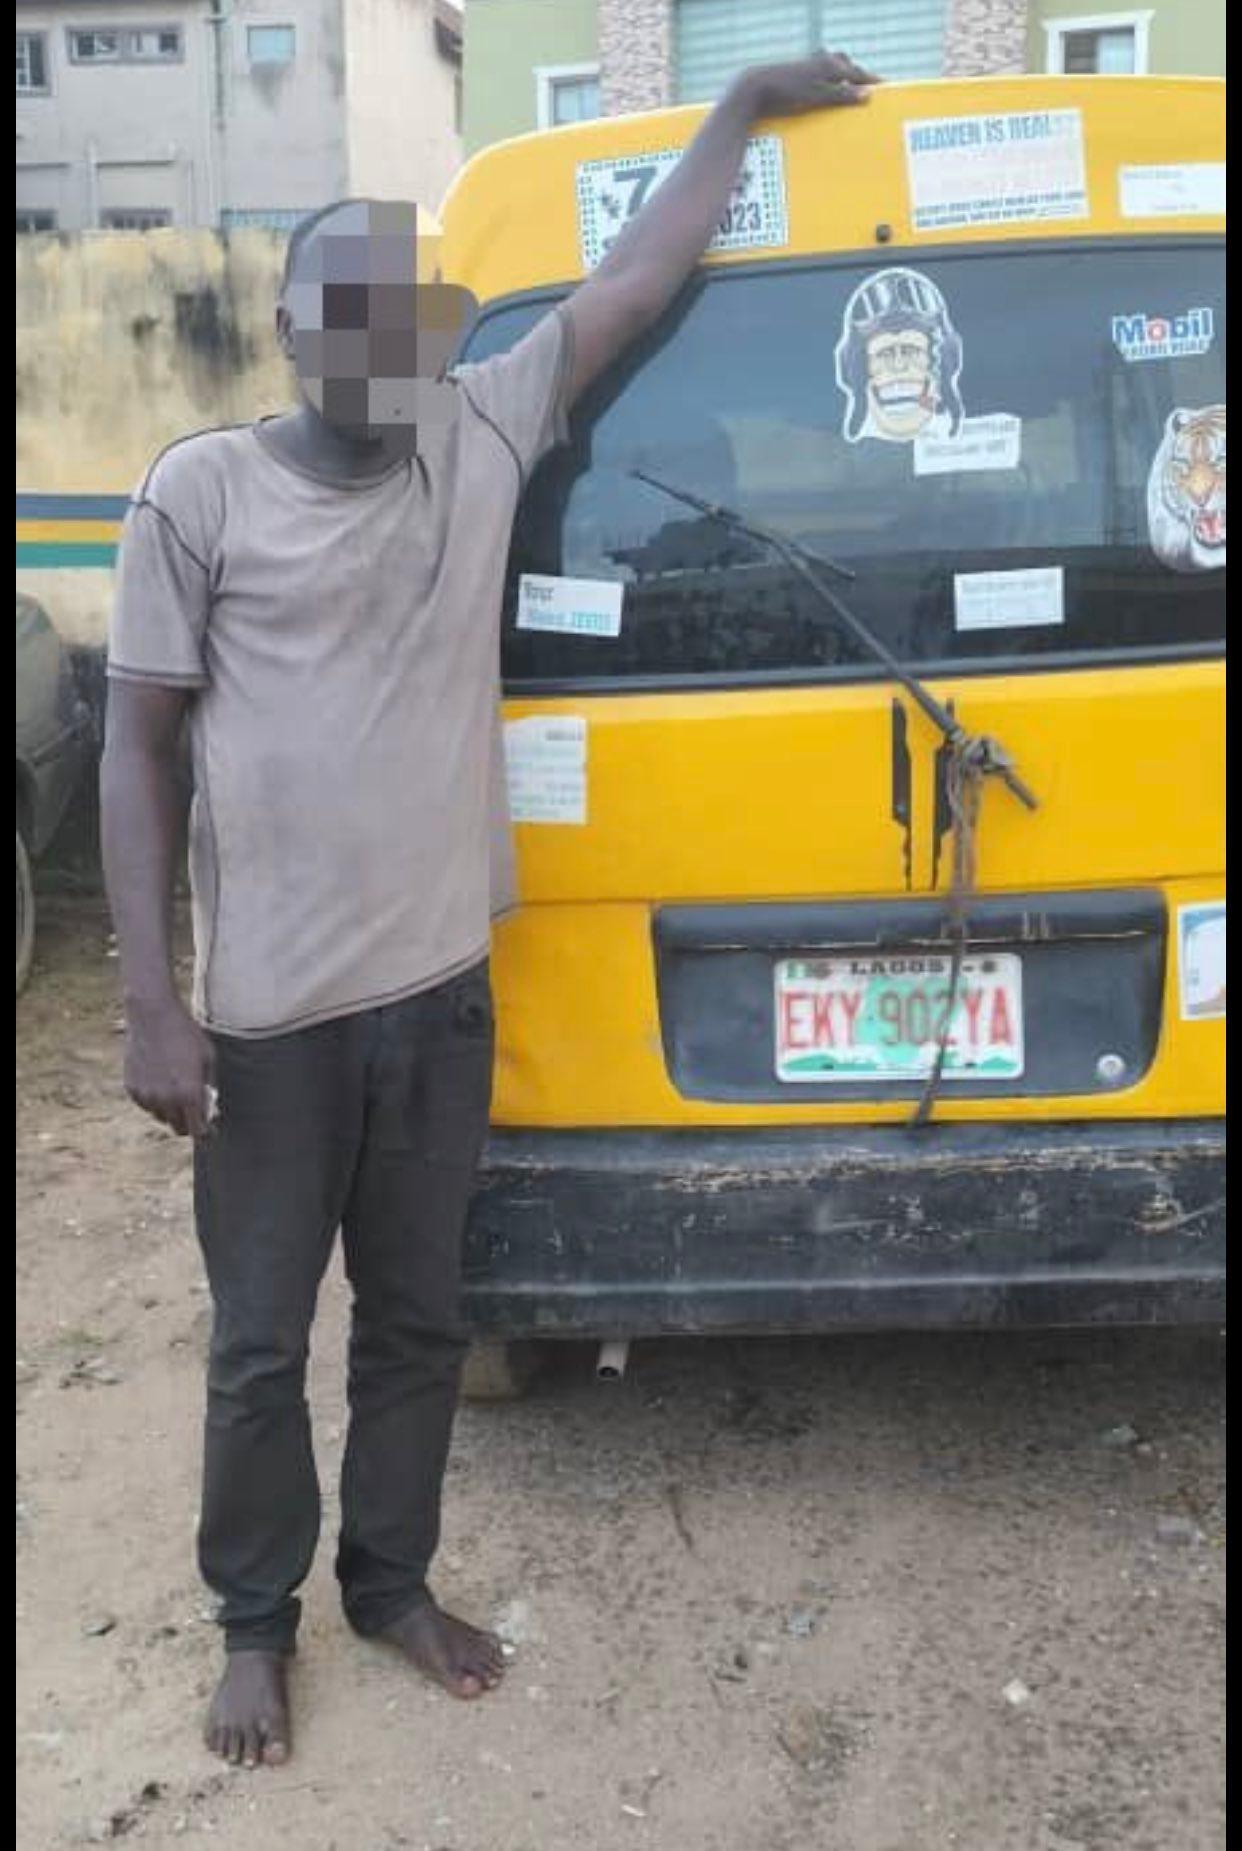 Lagos police arrest man for stealing mini-bus